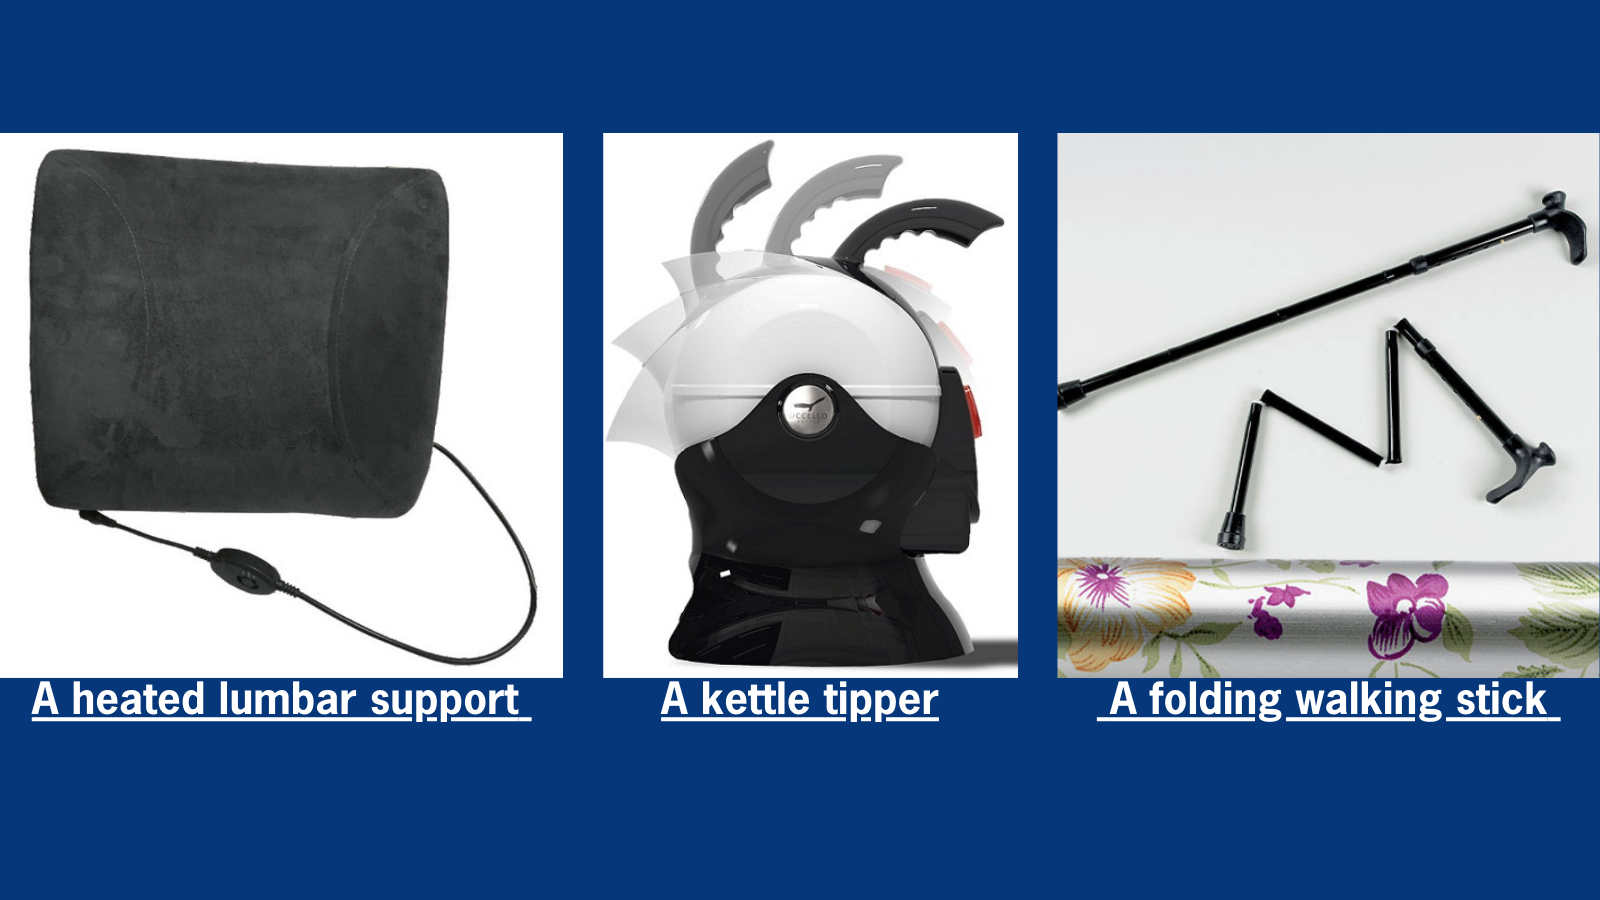 An image of a heated lumbar support, a black and white kettle tipper, and a floral patterned folding walking stick.